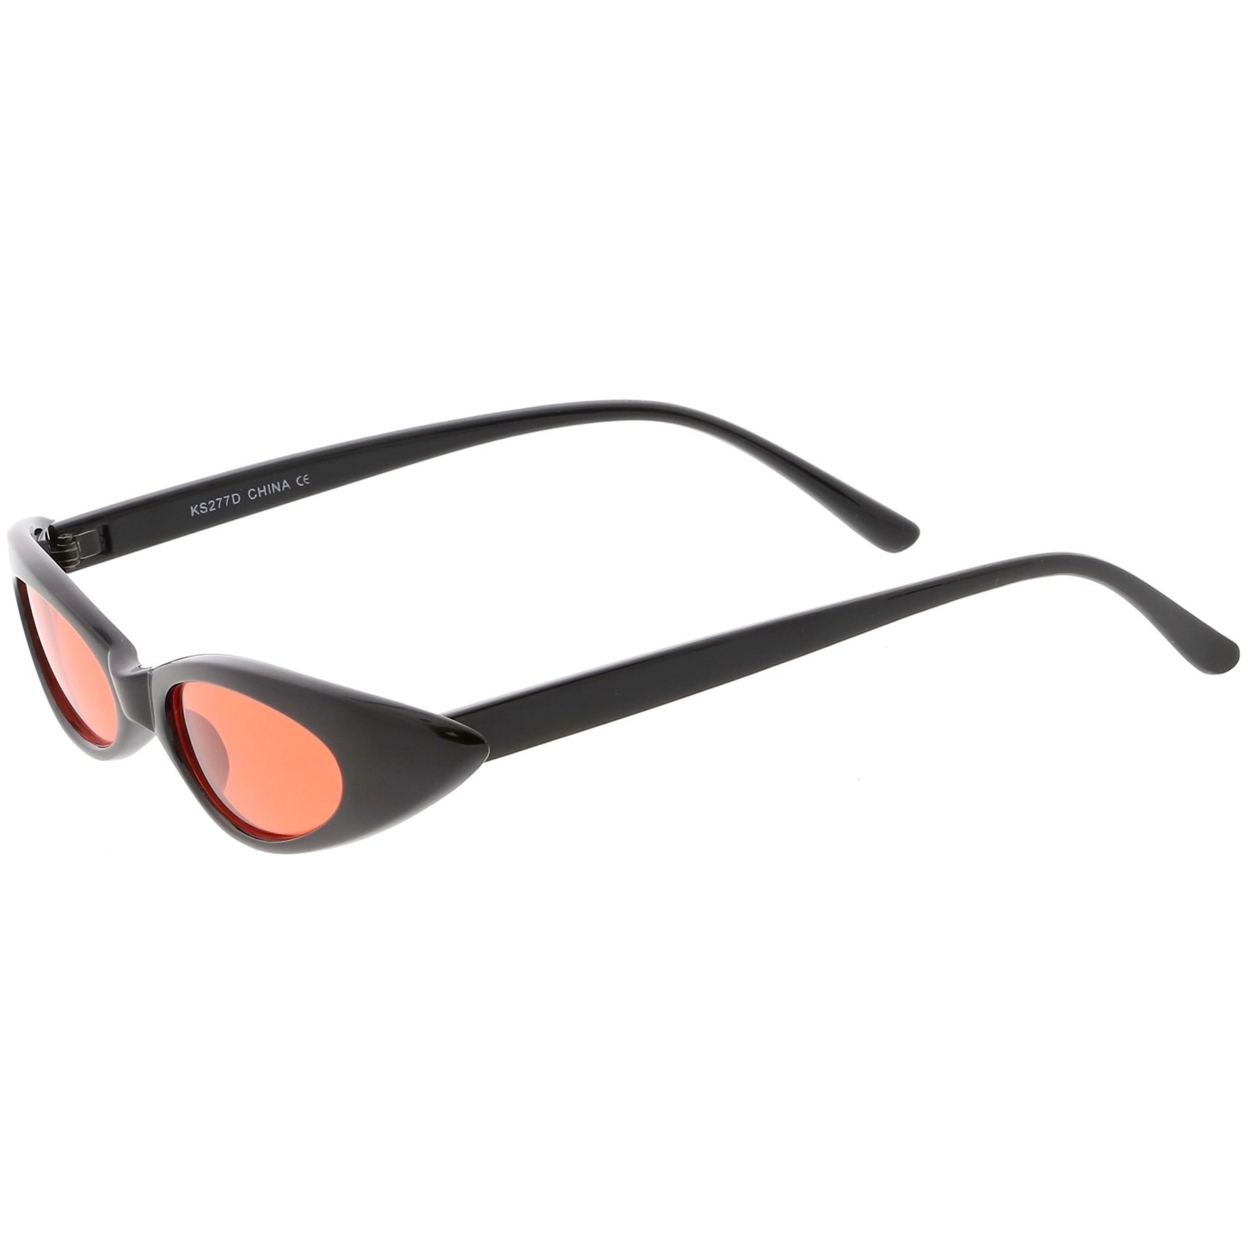 Ultra Thin Extreme Oval Sunglasses Color Tinted Lens 47mm - Black / Pink